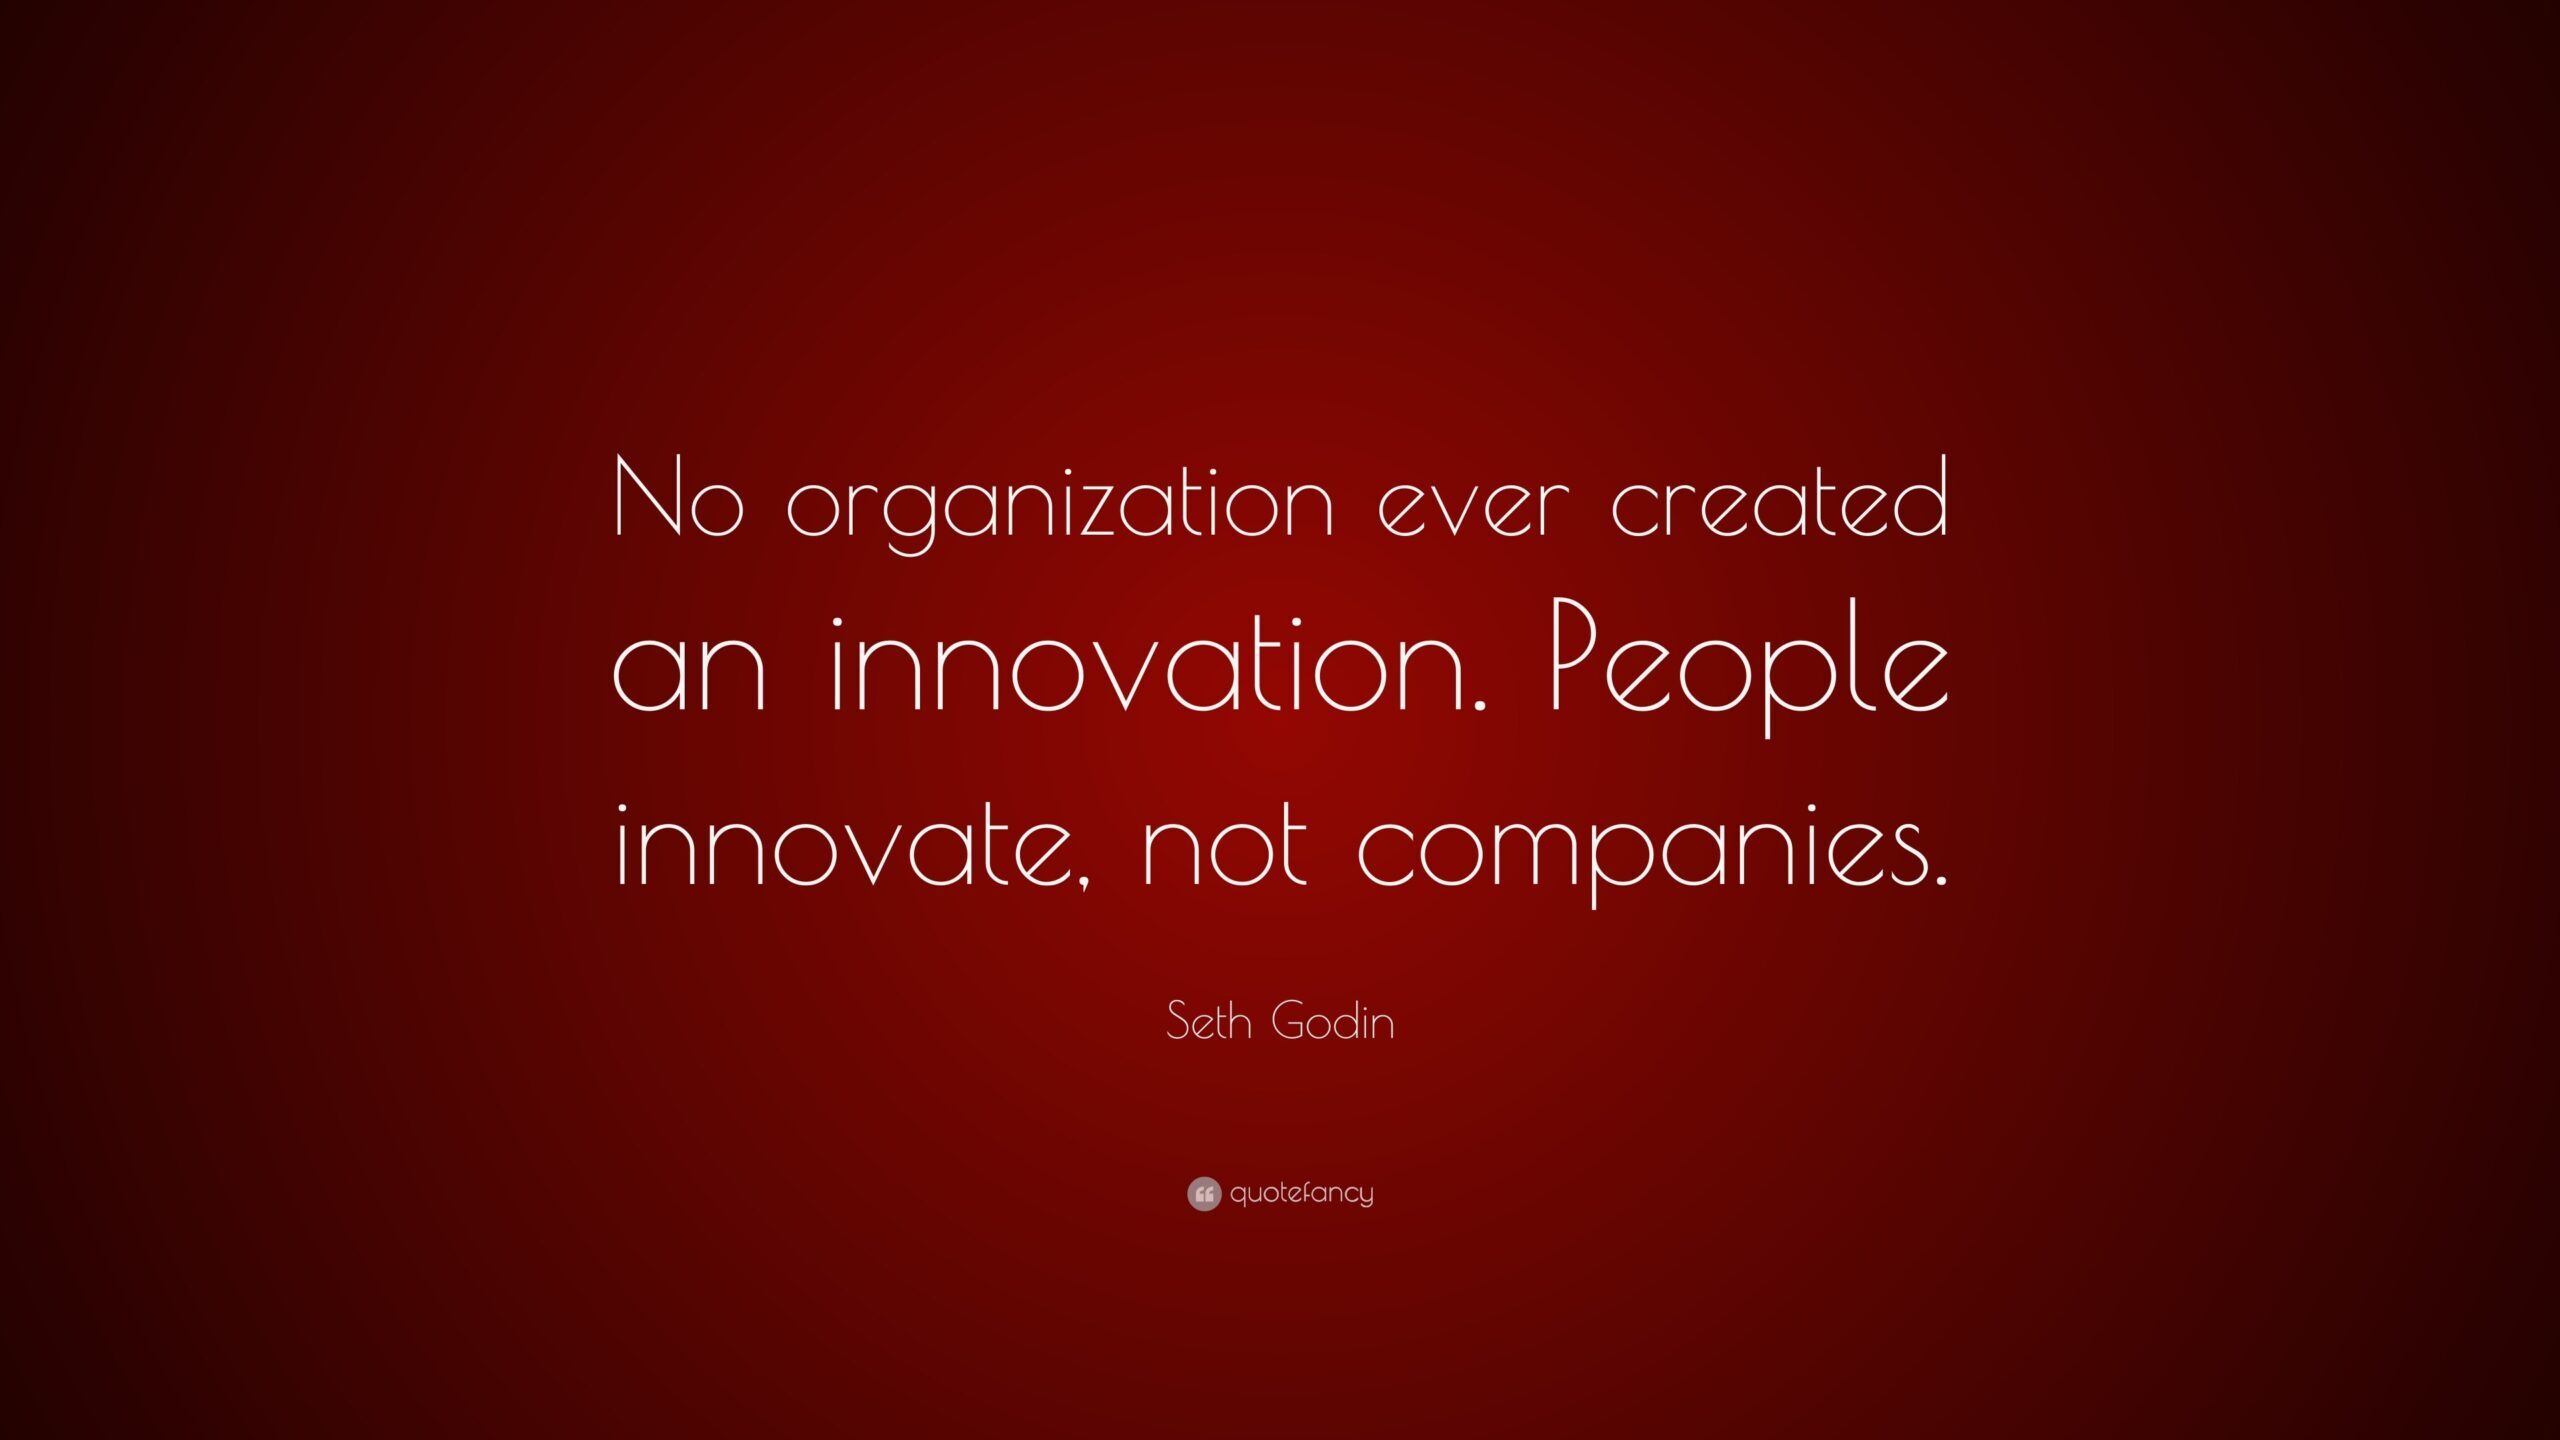 513870-seth-godin-quote-no-organization-ever-created-an-innovation-people-5622320